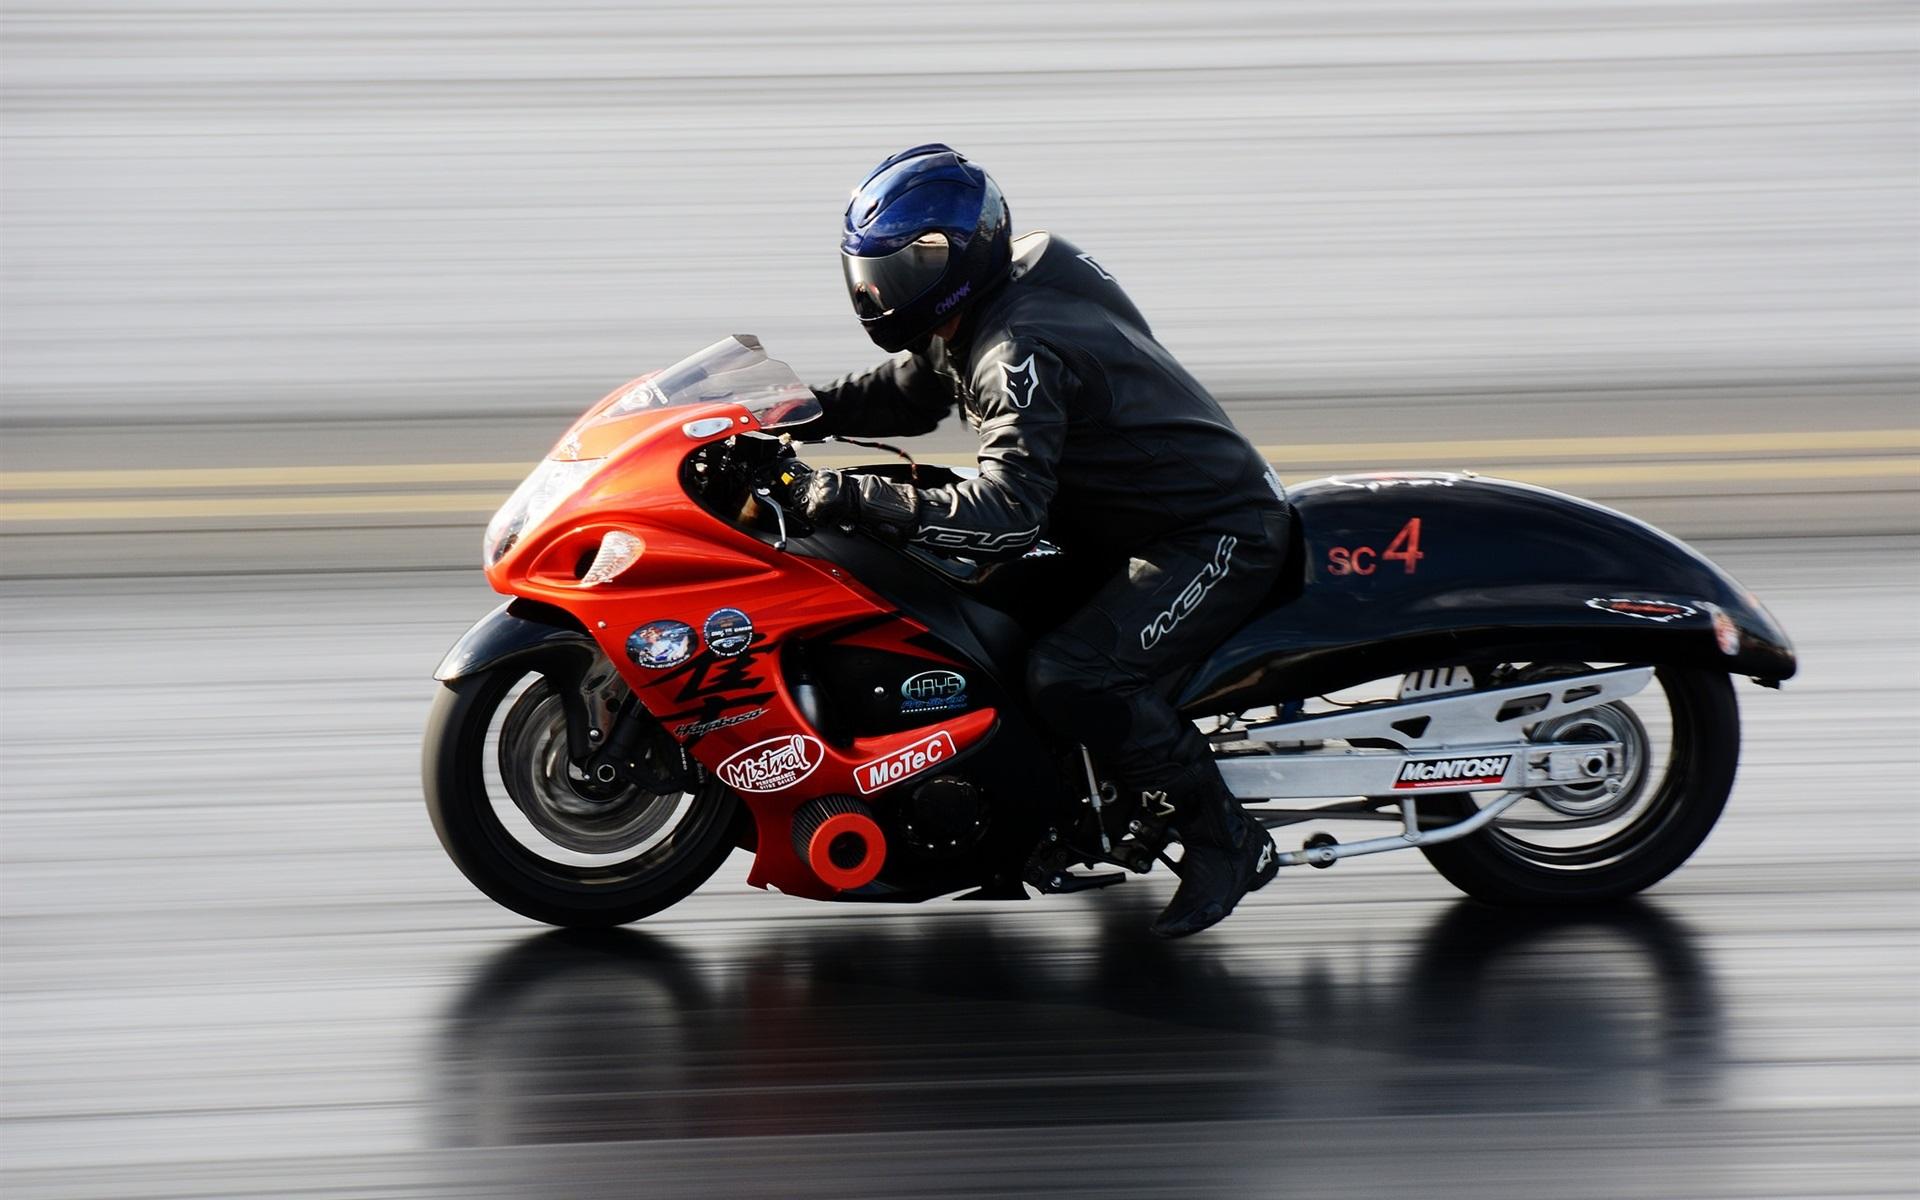 Wallpaper Motorcycle, high speed, drag racing 1920x1200 HD Picture